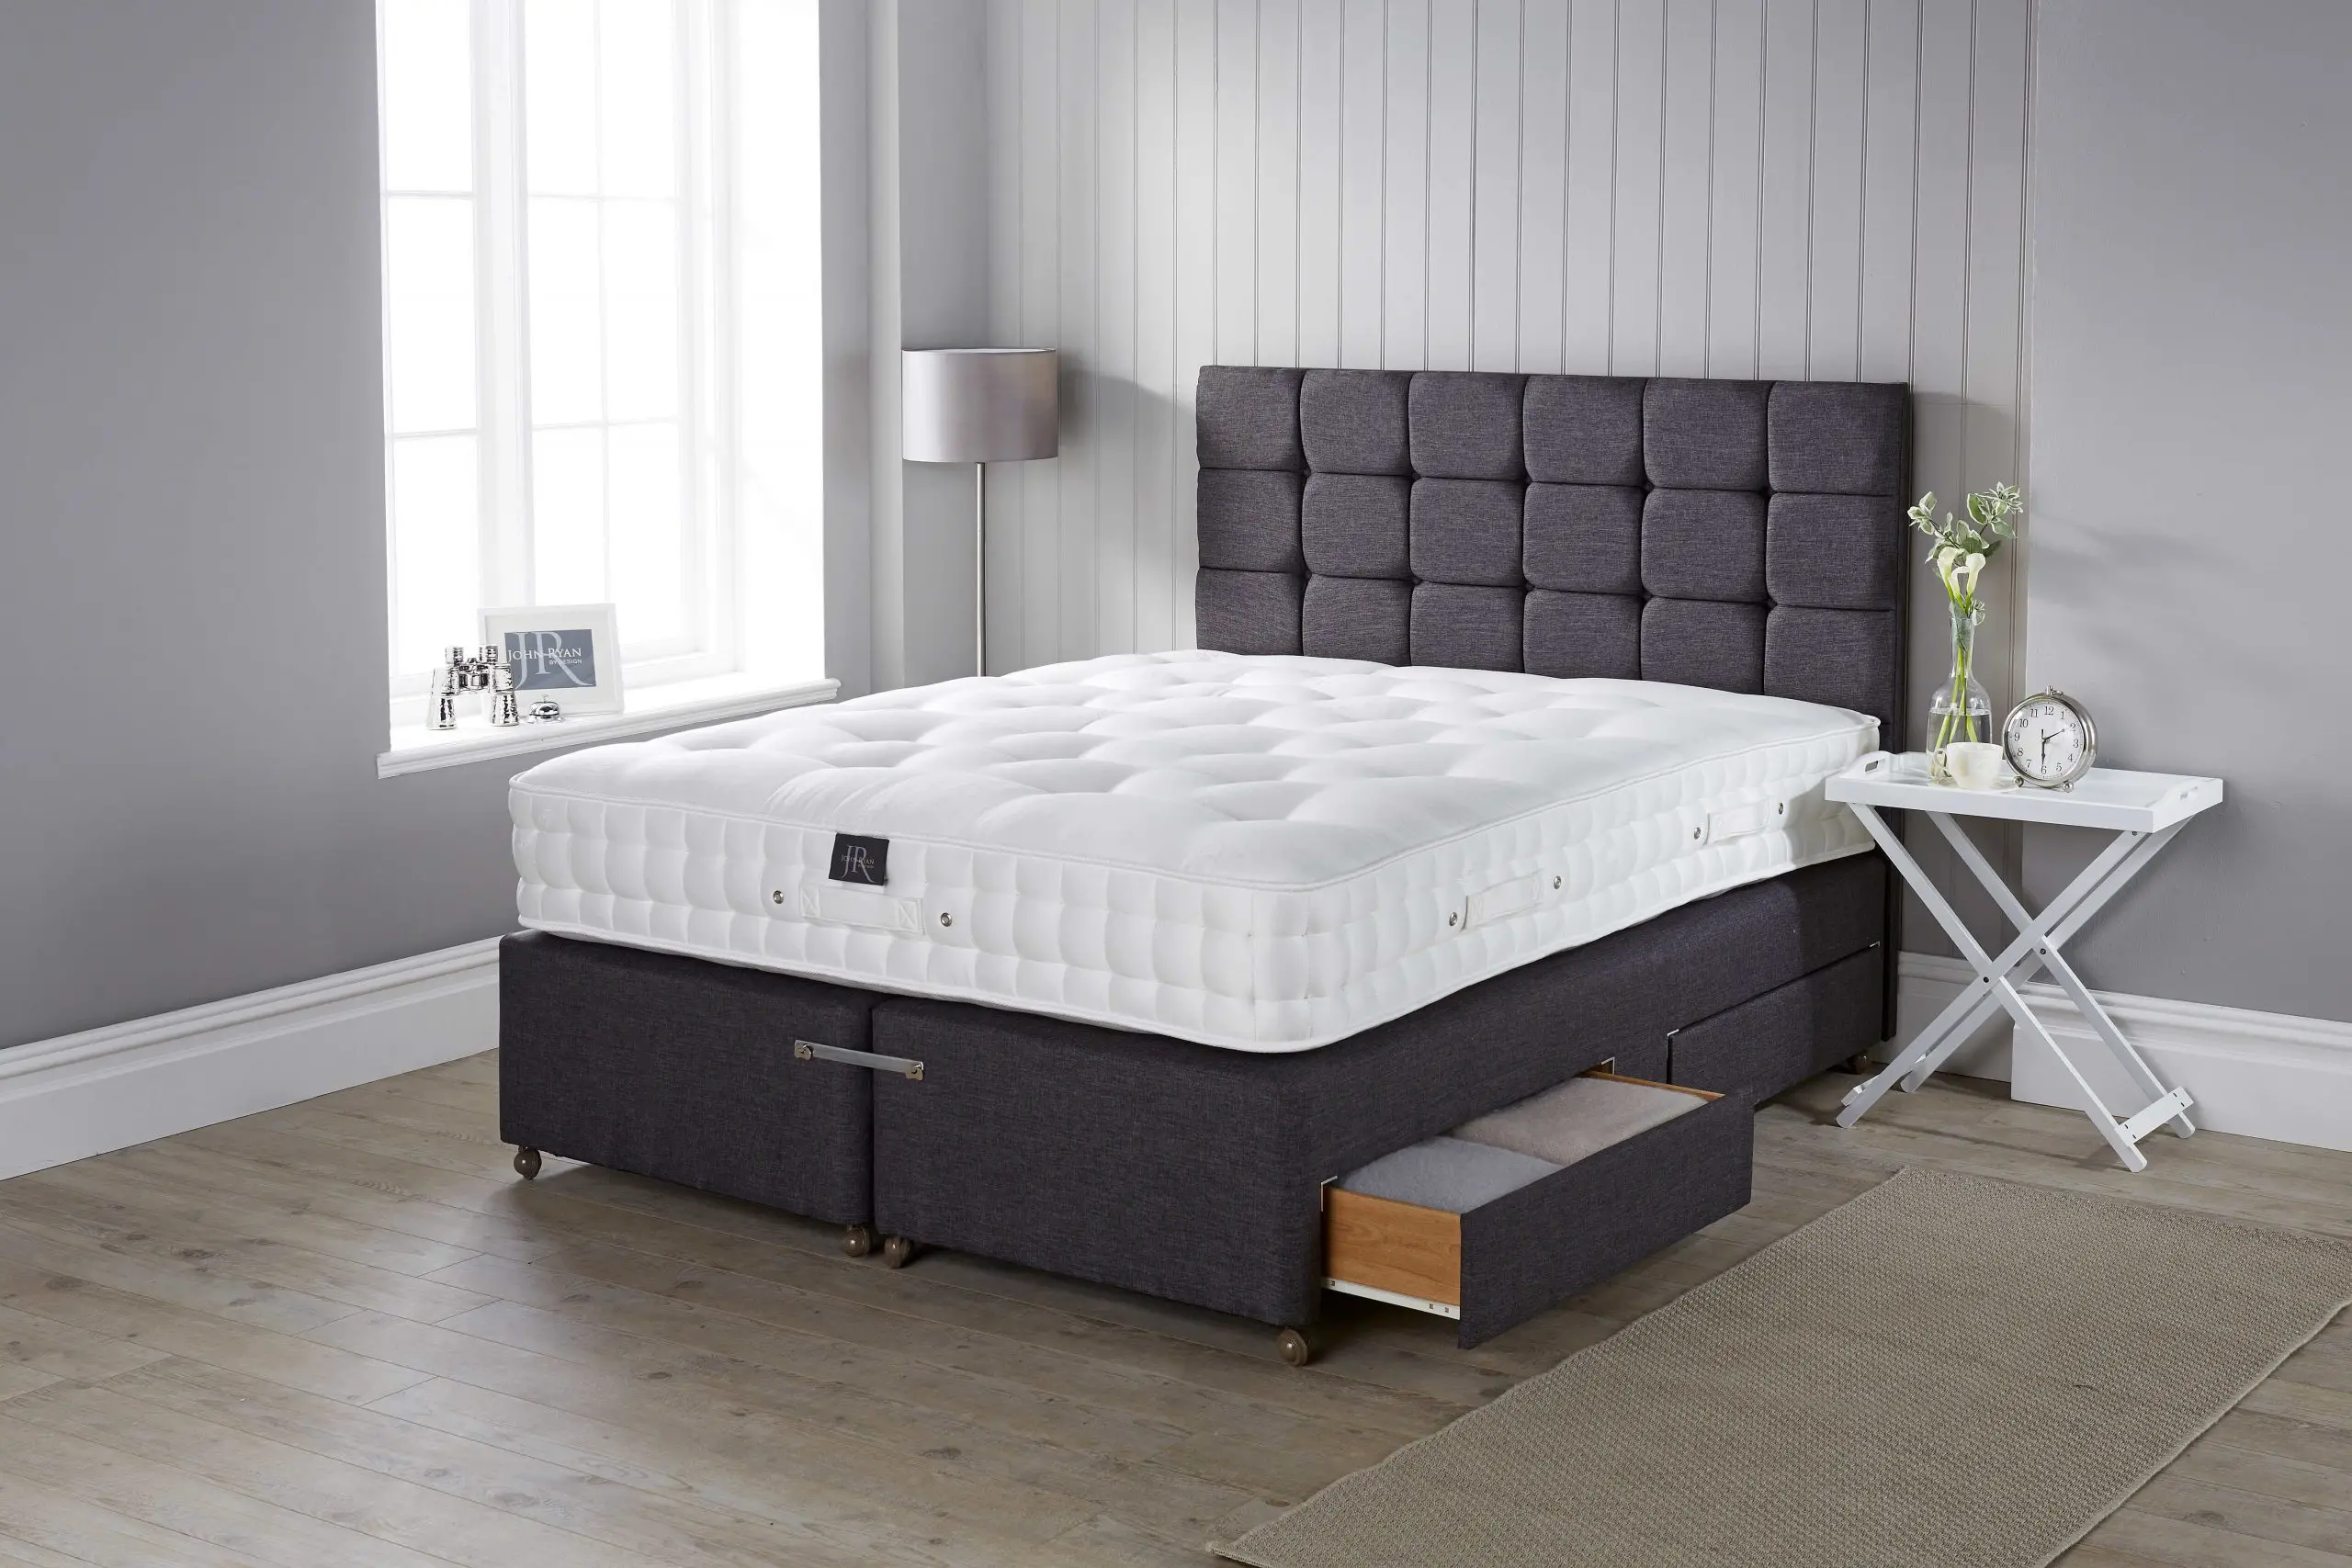 What Bed Is Best For Me. How to Choose a Mattress